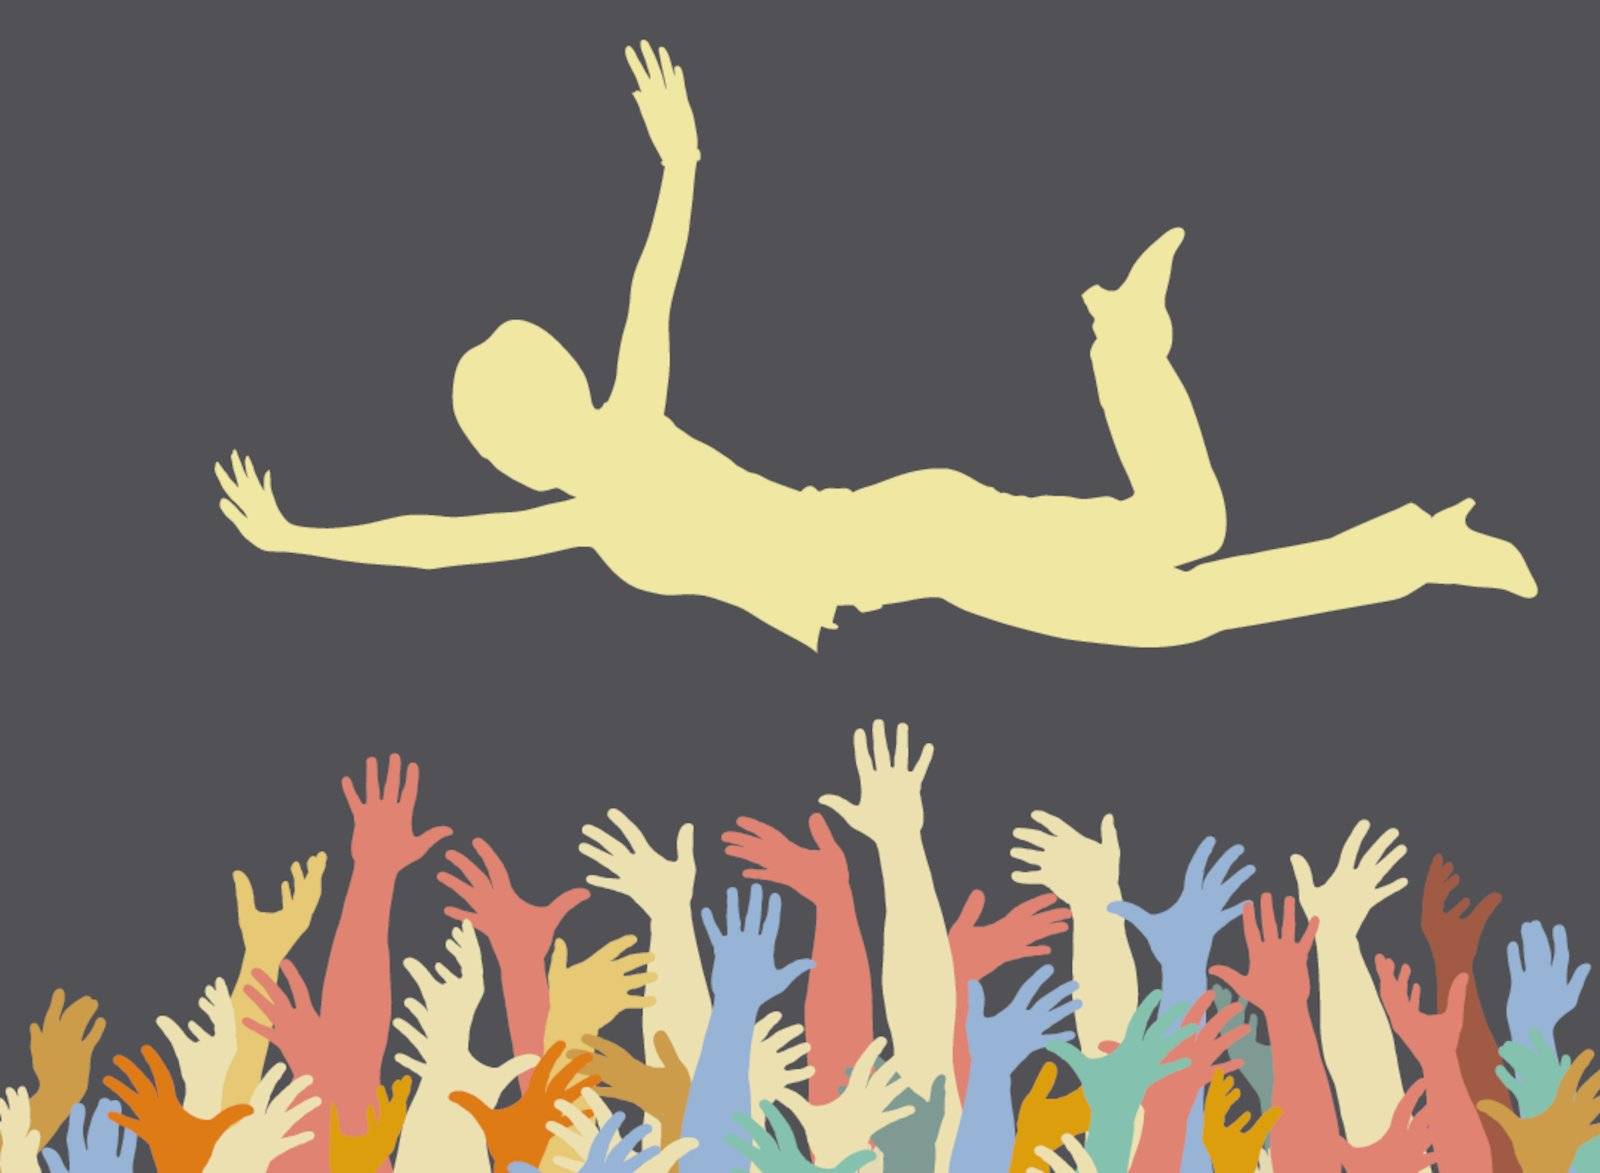 Editable vector illustration of a woman being caught by many hands